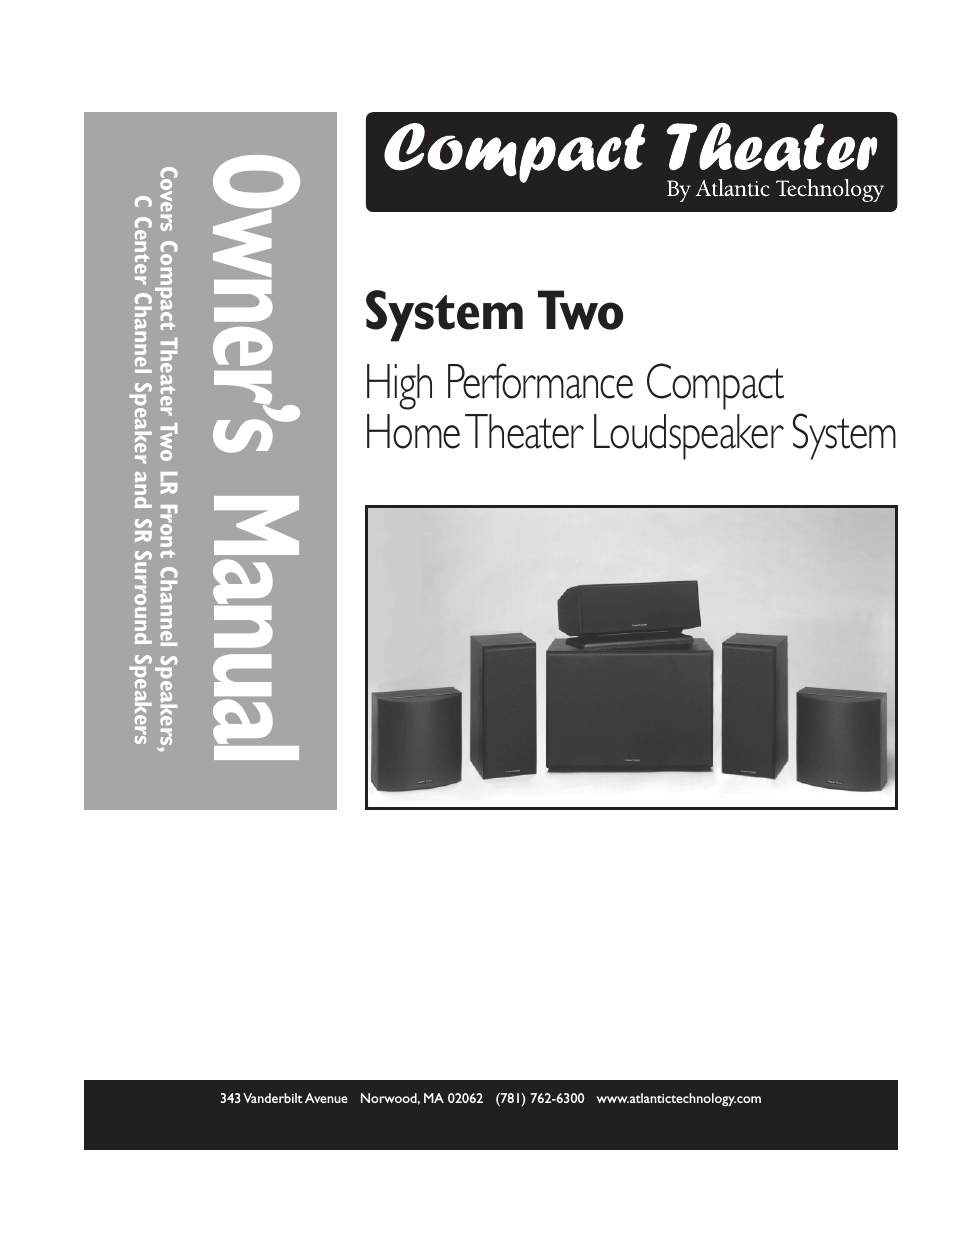 Compact Theater HomeTheater Loudspeaker System